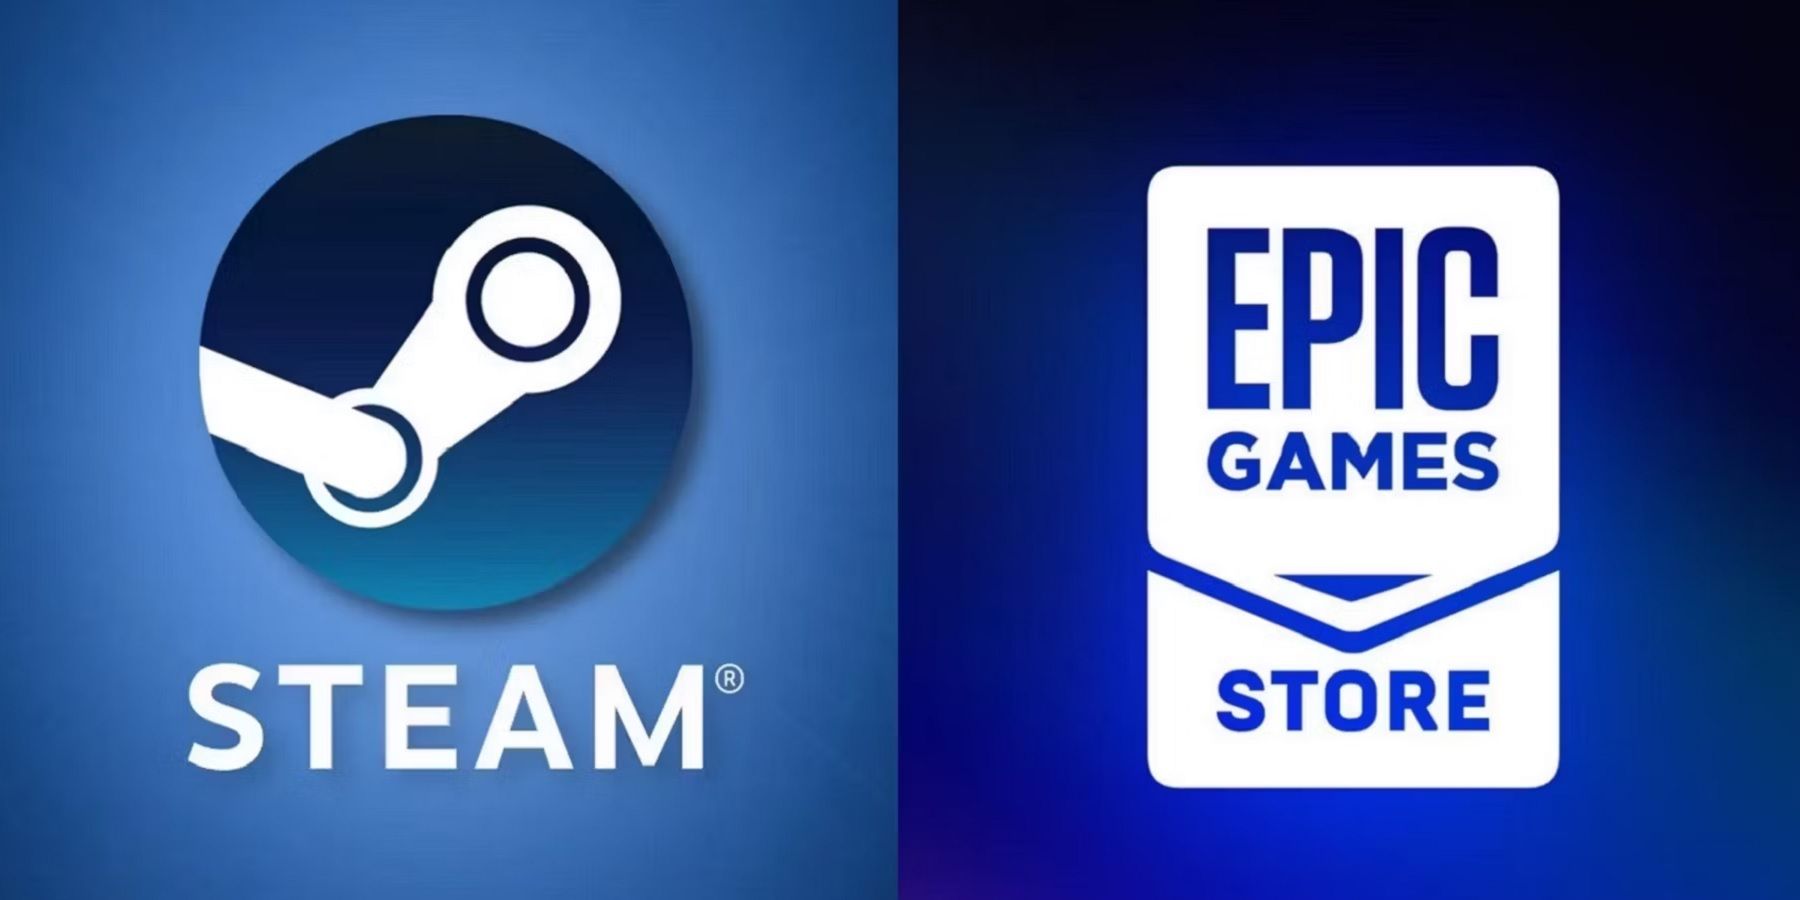 PC Gamers Can Claim 2 Big Games Completely Free Right Now